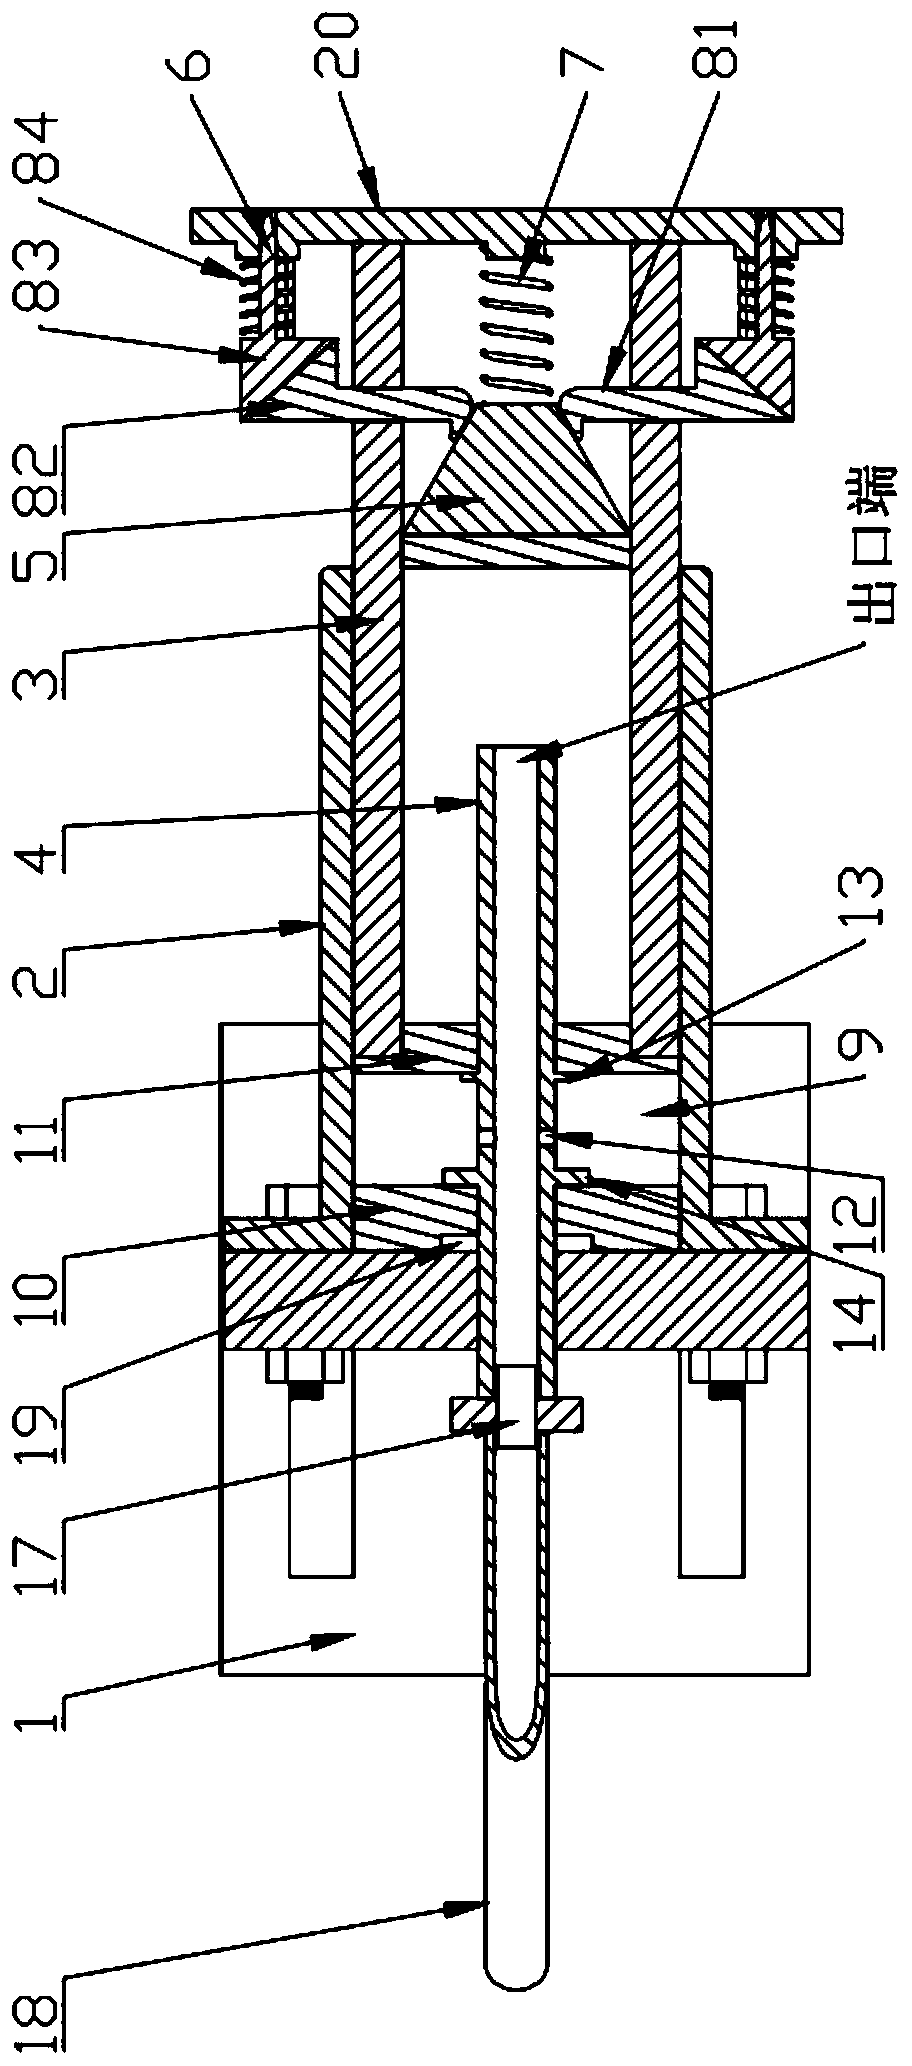 Positioning mechanism for agricultural and forestry large-dimension round timber processing